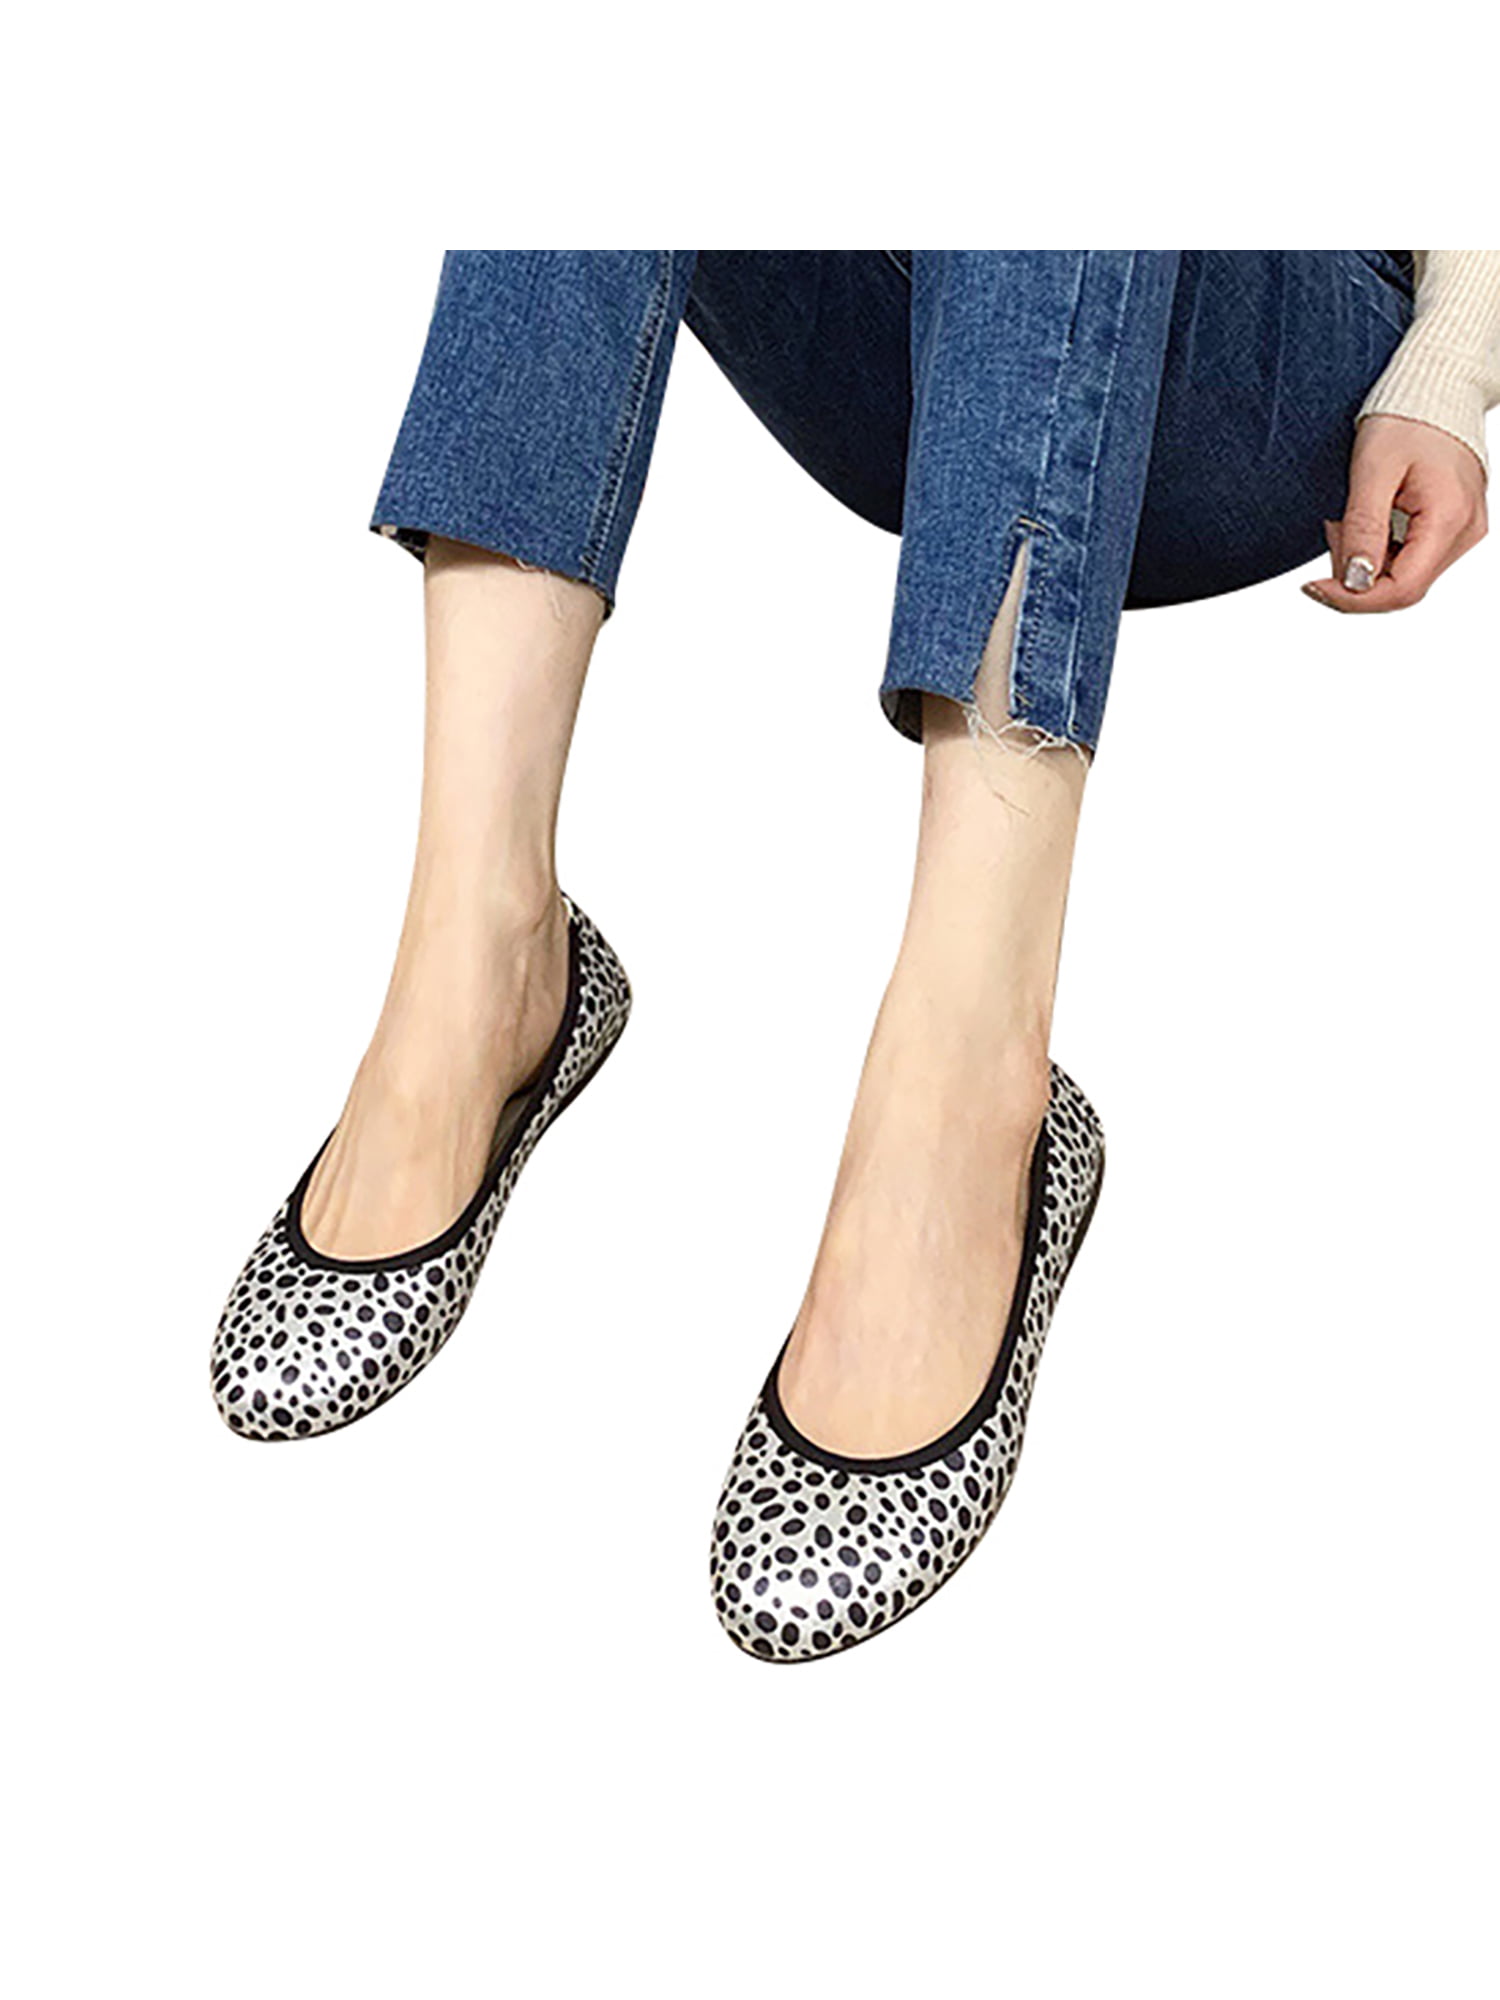 Details about   Fashion Women Flower Flats Pointy Toes Loafer Dating Party Casual Shoes Slip On